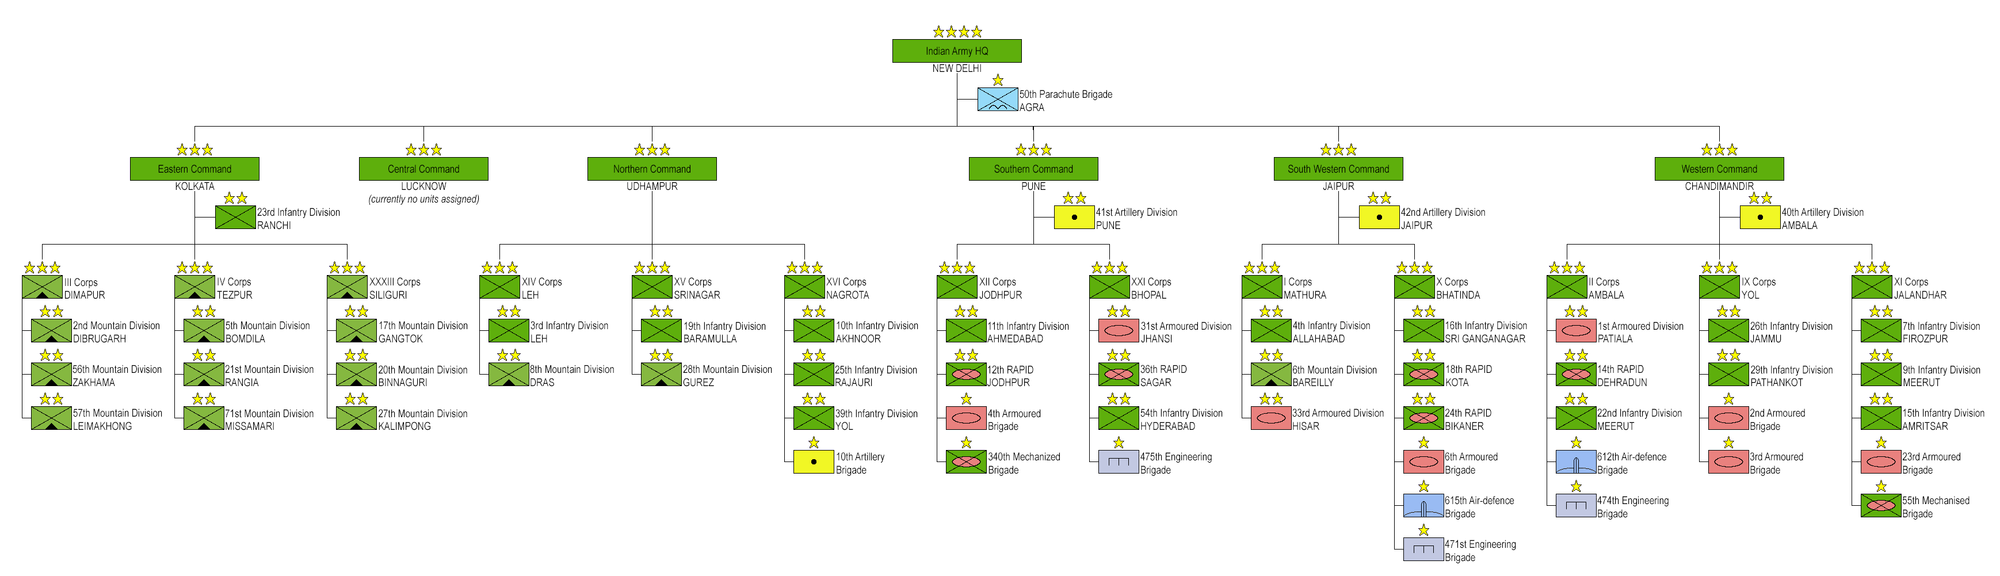 Indian_Army_Structure (1).png